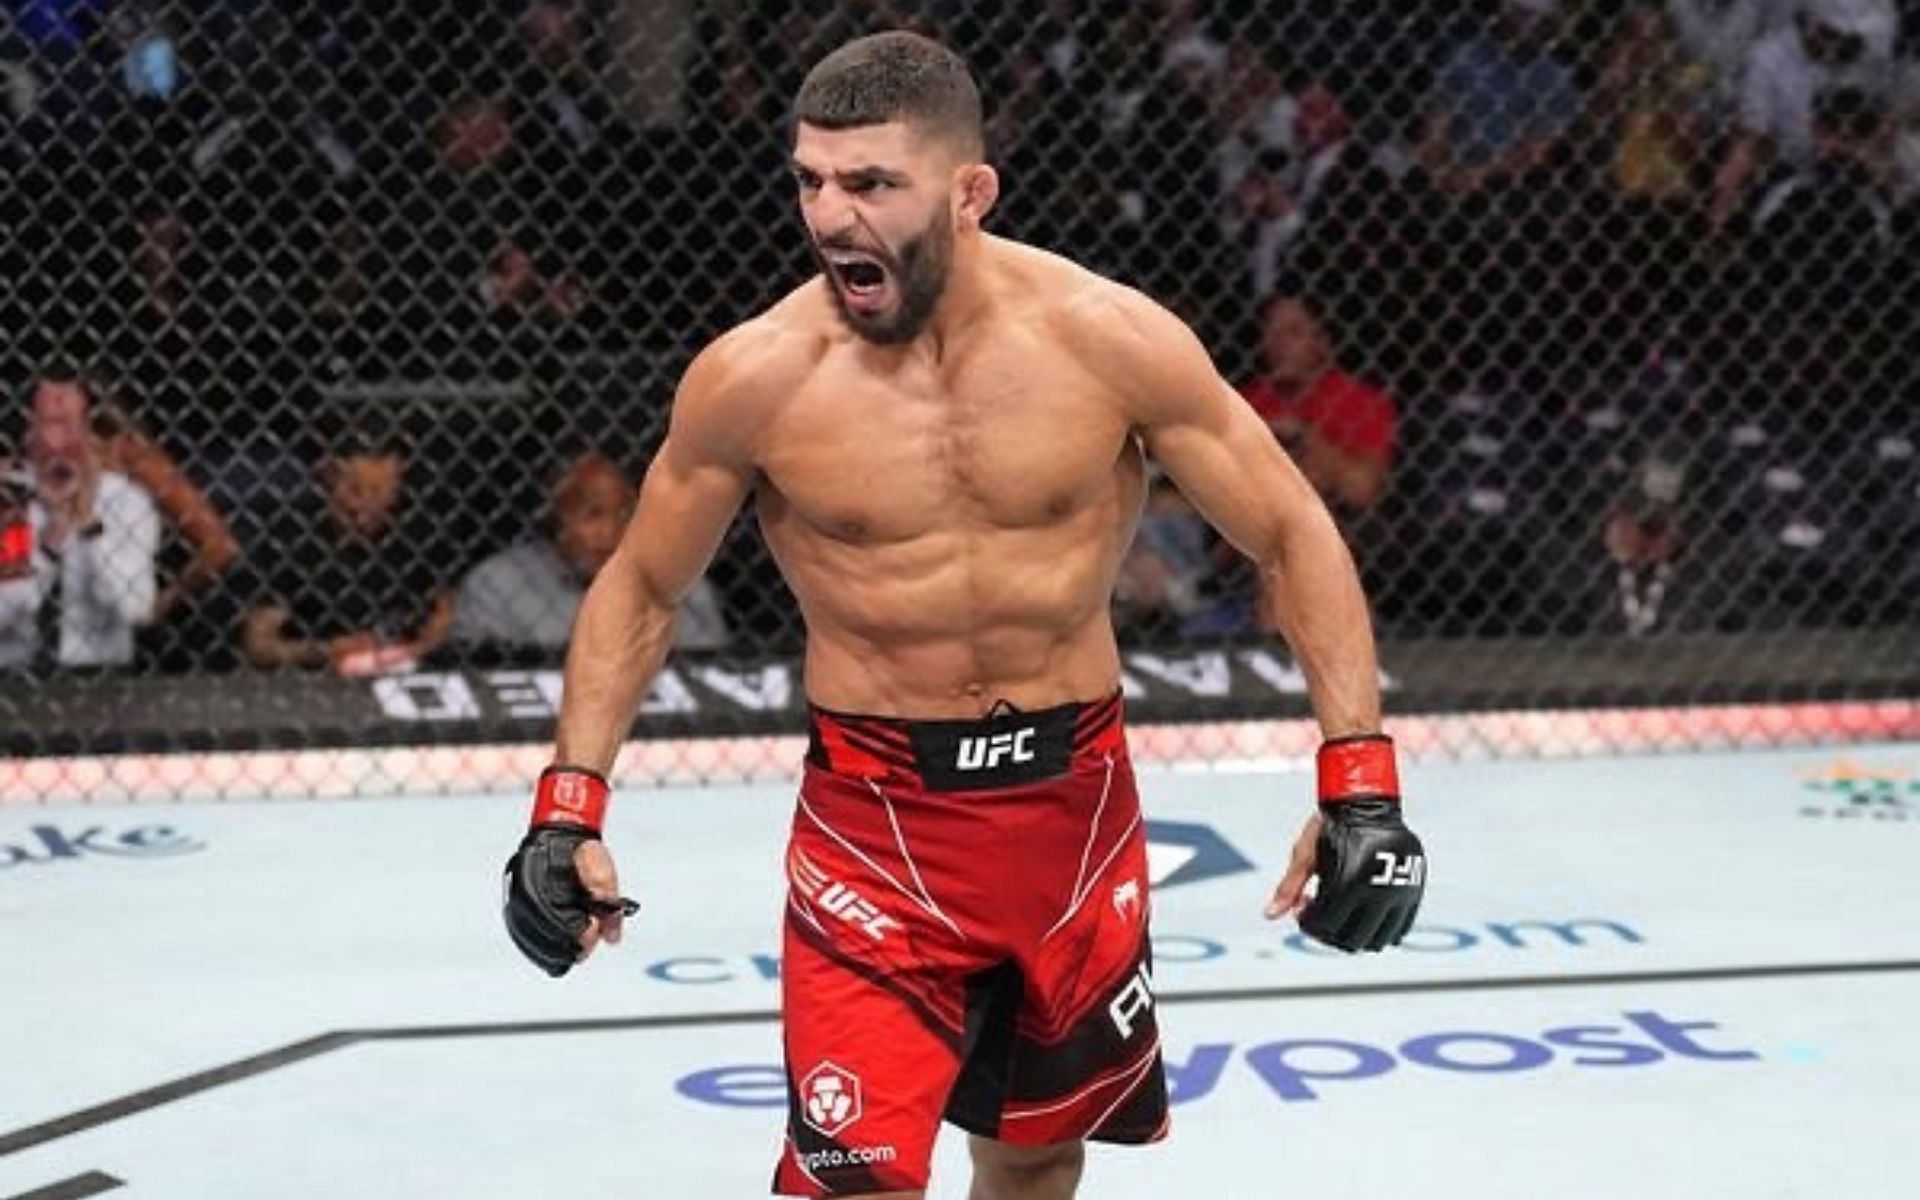 Amir Albazi is considered to be one of the top MMA fighters from Iraq today [Image courtesy: @amiralbazi on Instagram]